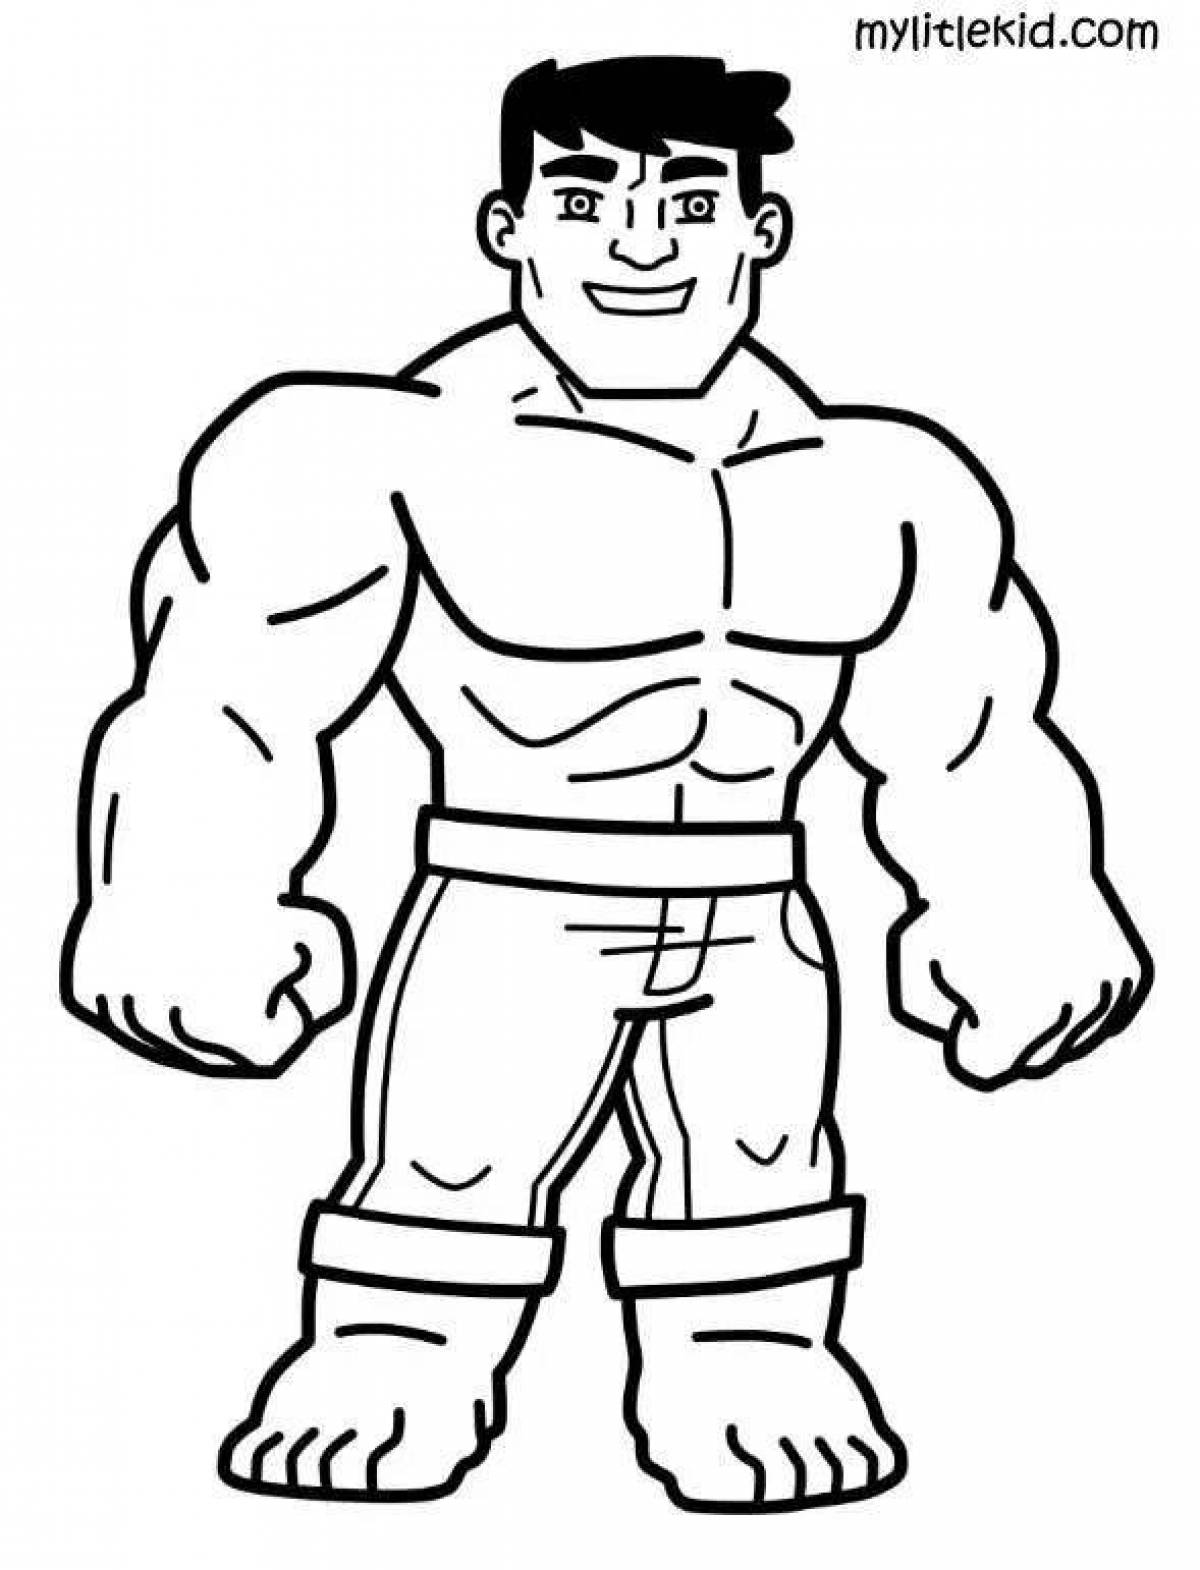 Hulk comic coloring book for 6-7 year olds